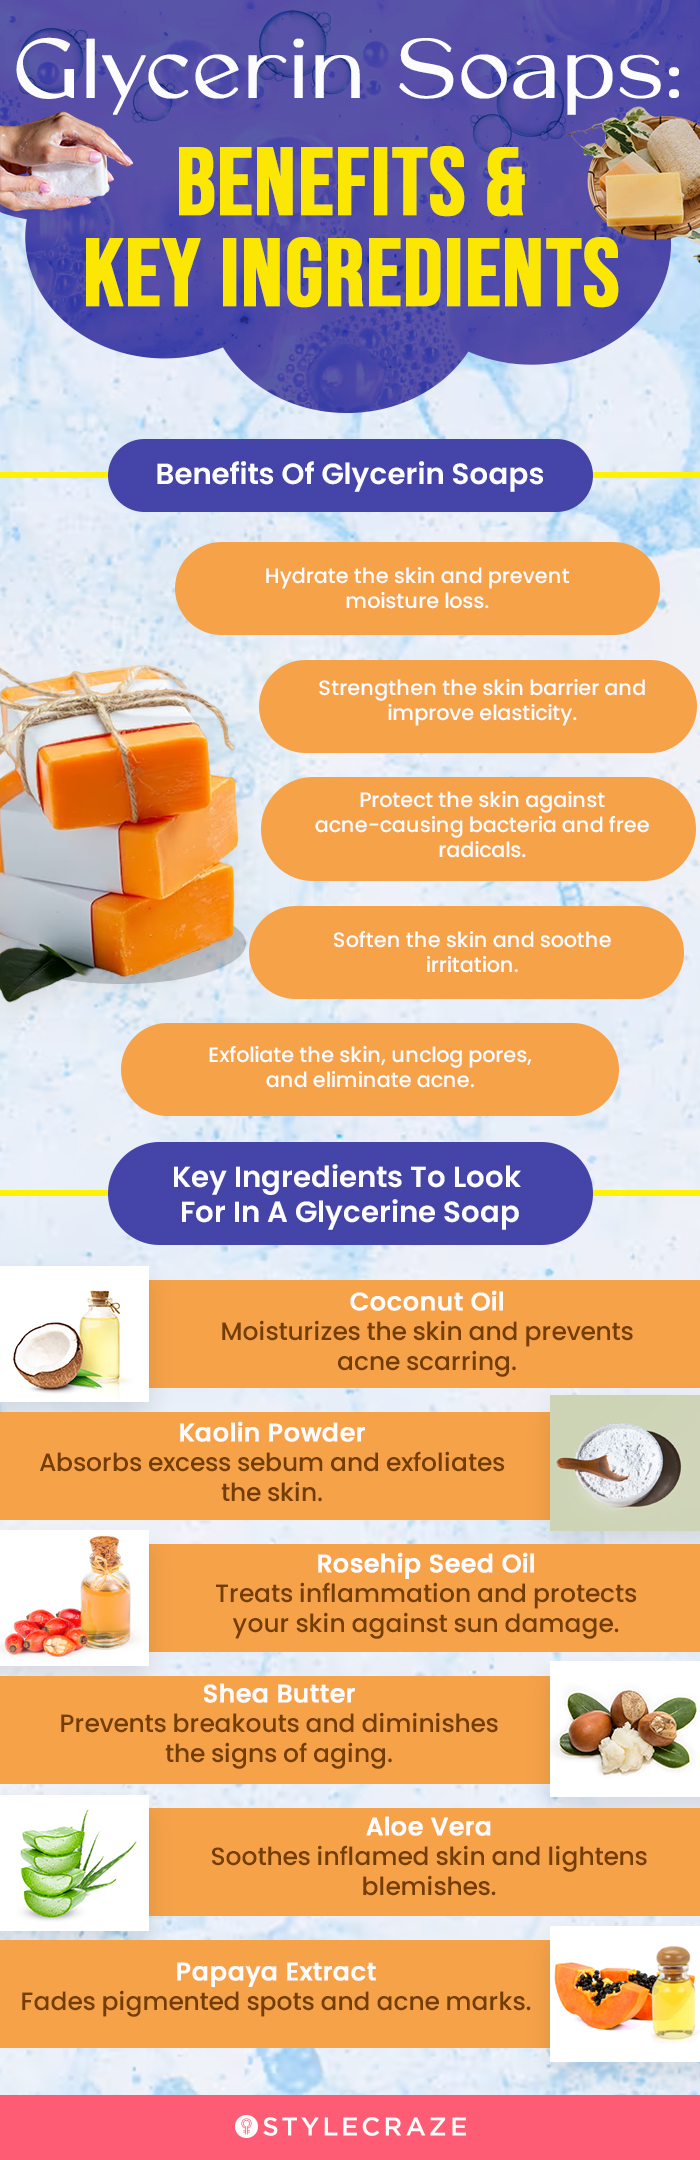 Glycerin Soaps: Benefits & Key Ingredients (infographic)